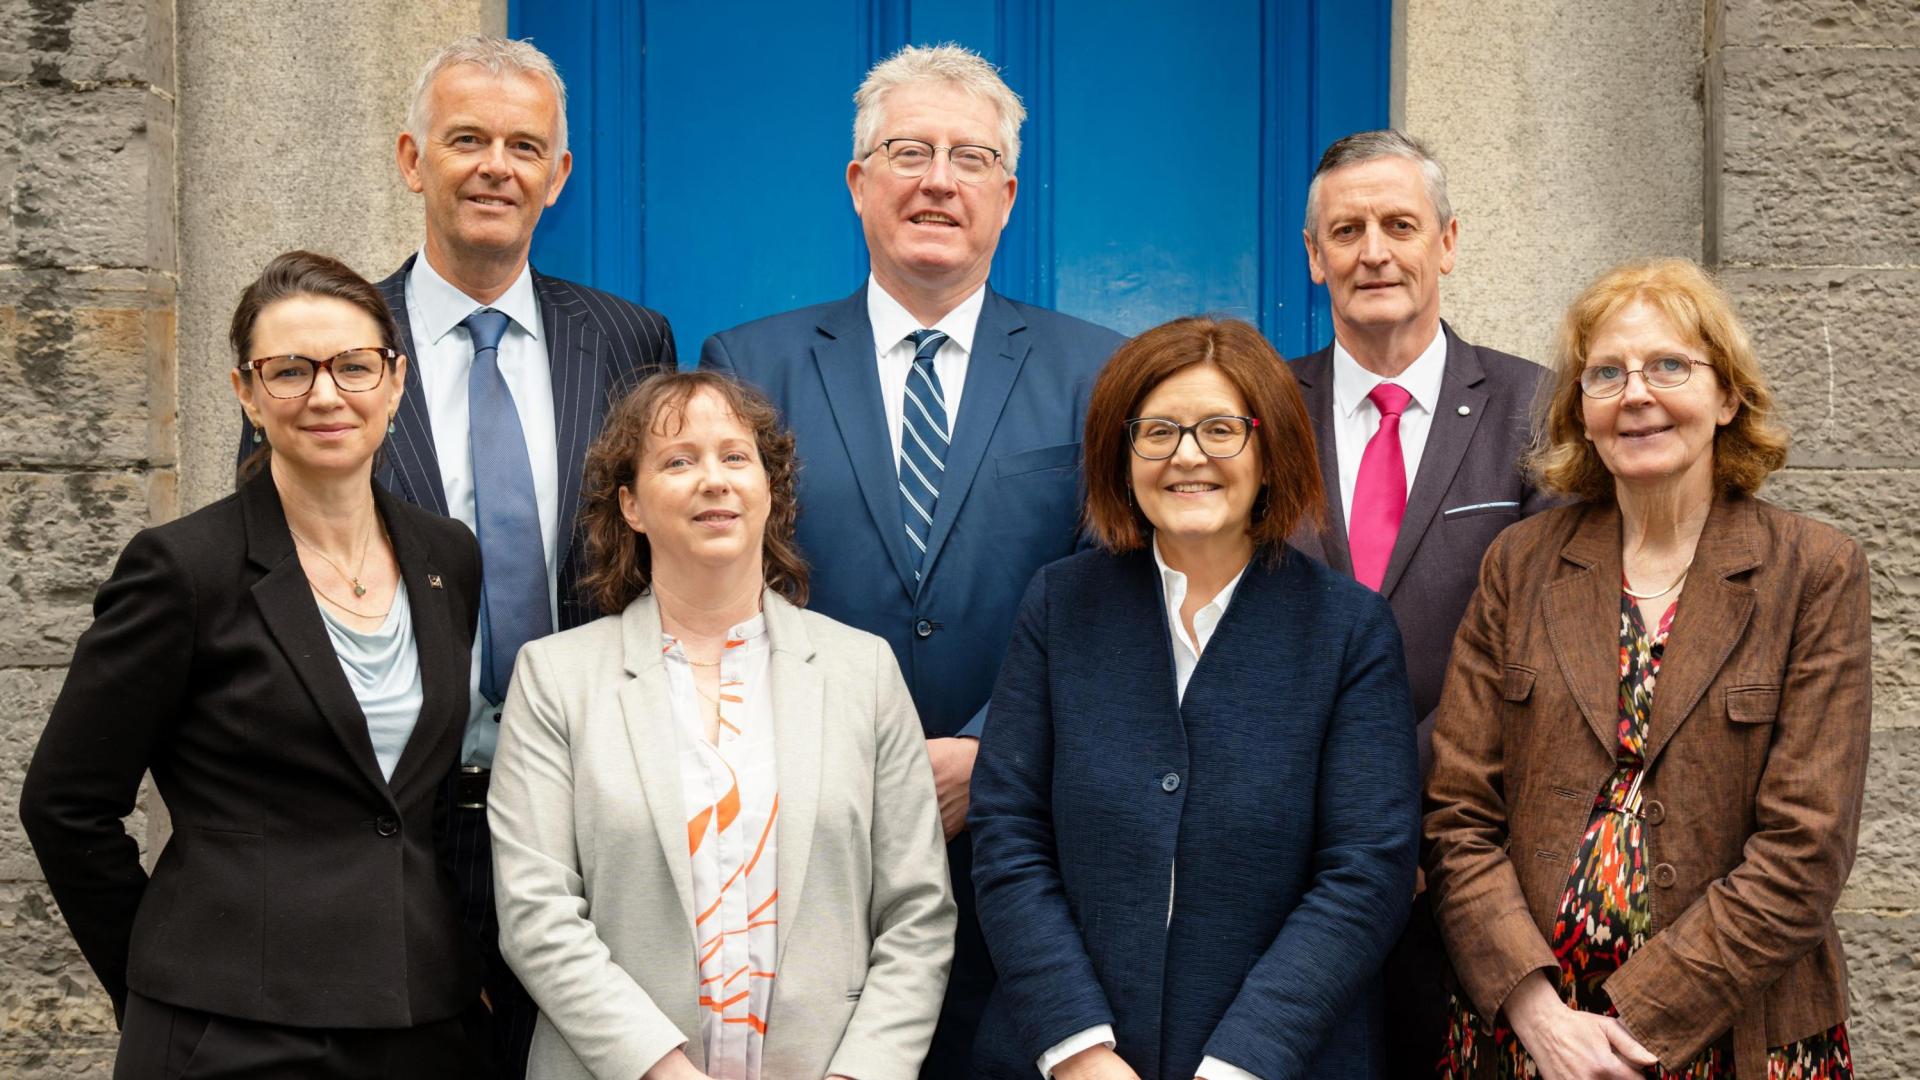 Dublin City University and Louth and Meath Education and Training Board agree new partnership